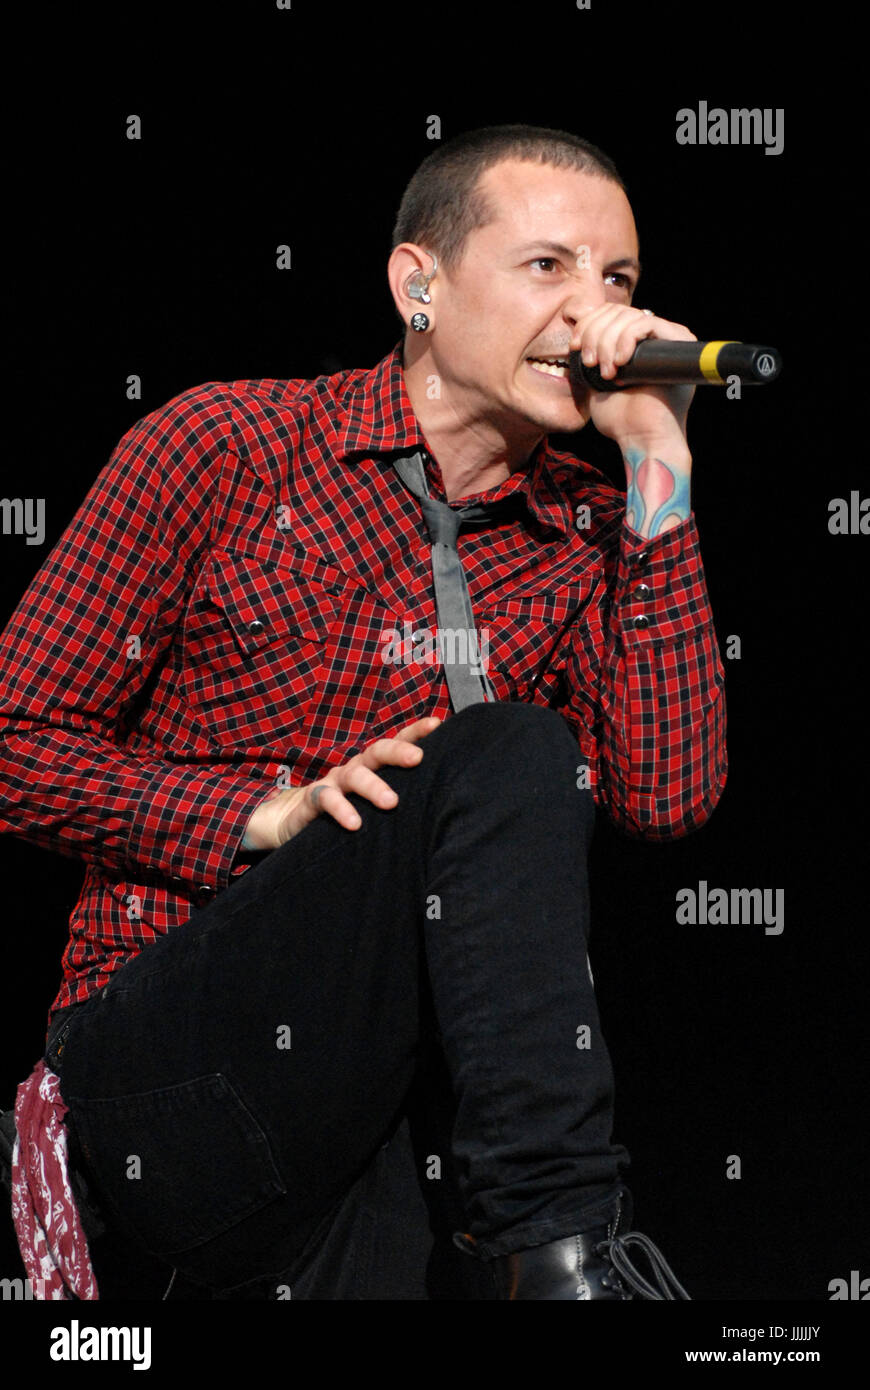 FILE PICS: 20th July, 2017. Donington Park, Derbyshire UK. 9th Jun, 2007. Chester Bennington, the lead singer of Linkin Park has passed away at the age of 41 today 20th July 2017 - Chester Bennington of Linkin Park photographed during their performance at Download Festival 2007 - day two 9th June 2007 at Donington Park, Derbyshire Credit: Ben Rector/Alamy Live News Stock Photo